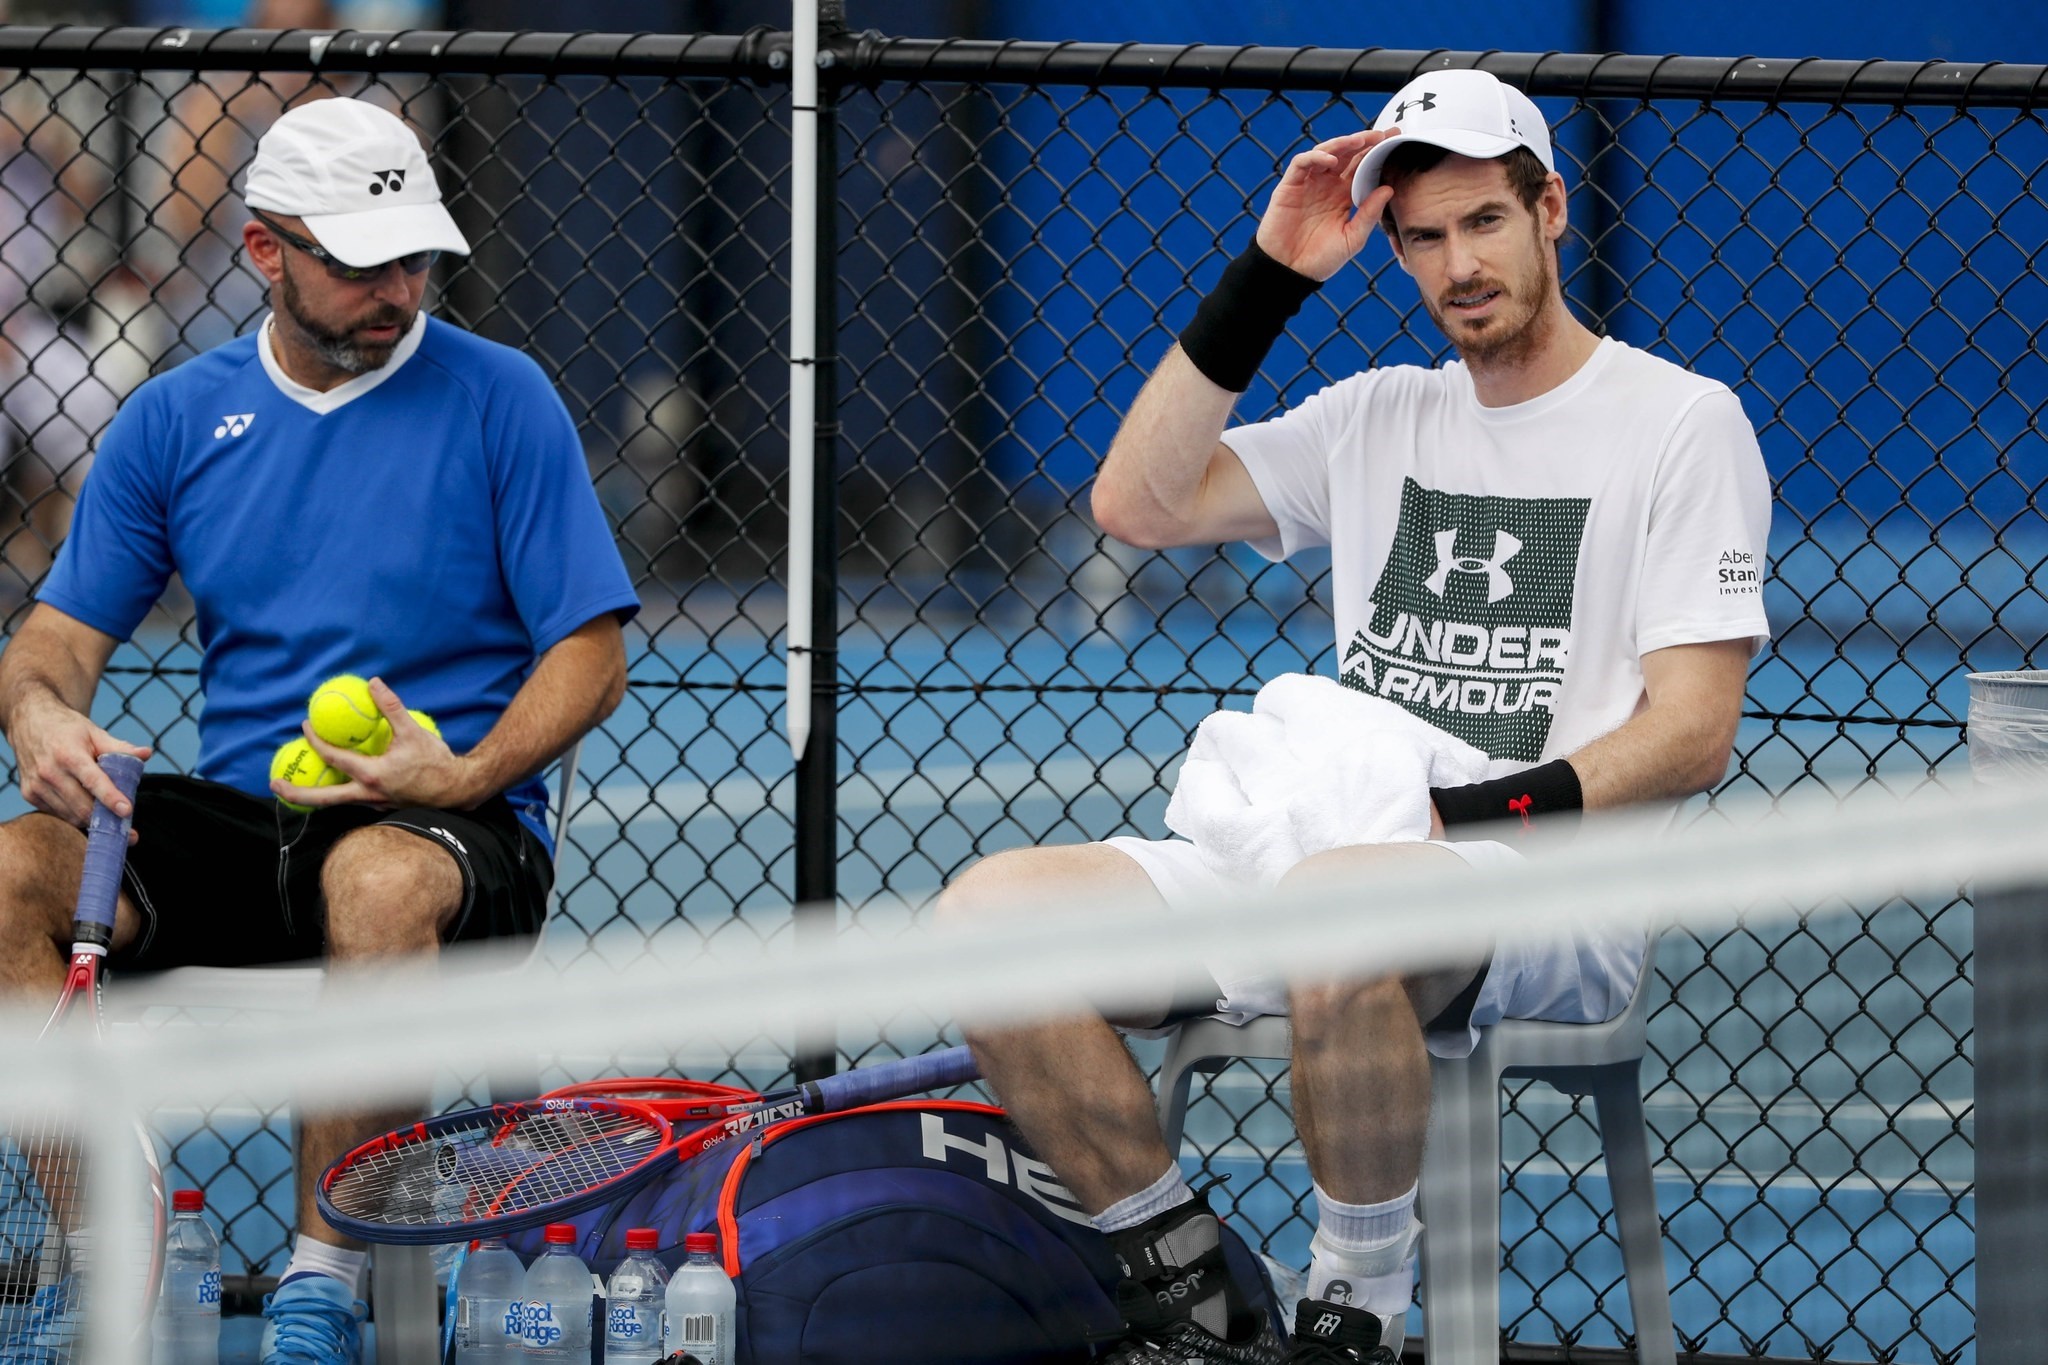 Britain's Andy Murray takes a break during a practice session with Milos Raonic of Canada at the Brisbane International Tennis Tournament in Brisbane, January 1, 2018. (EPA Photo)